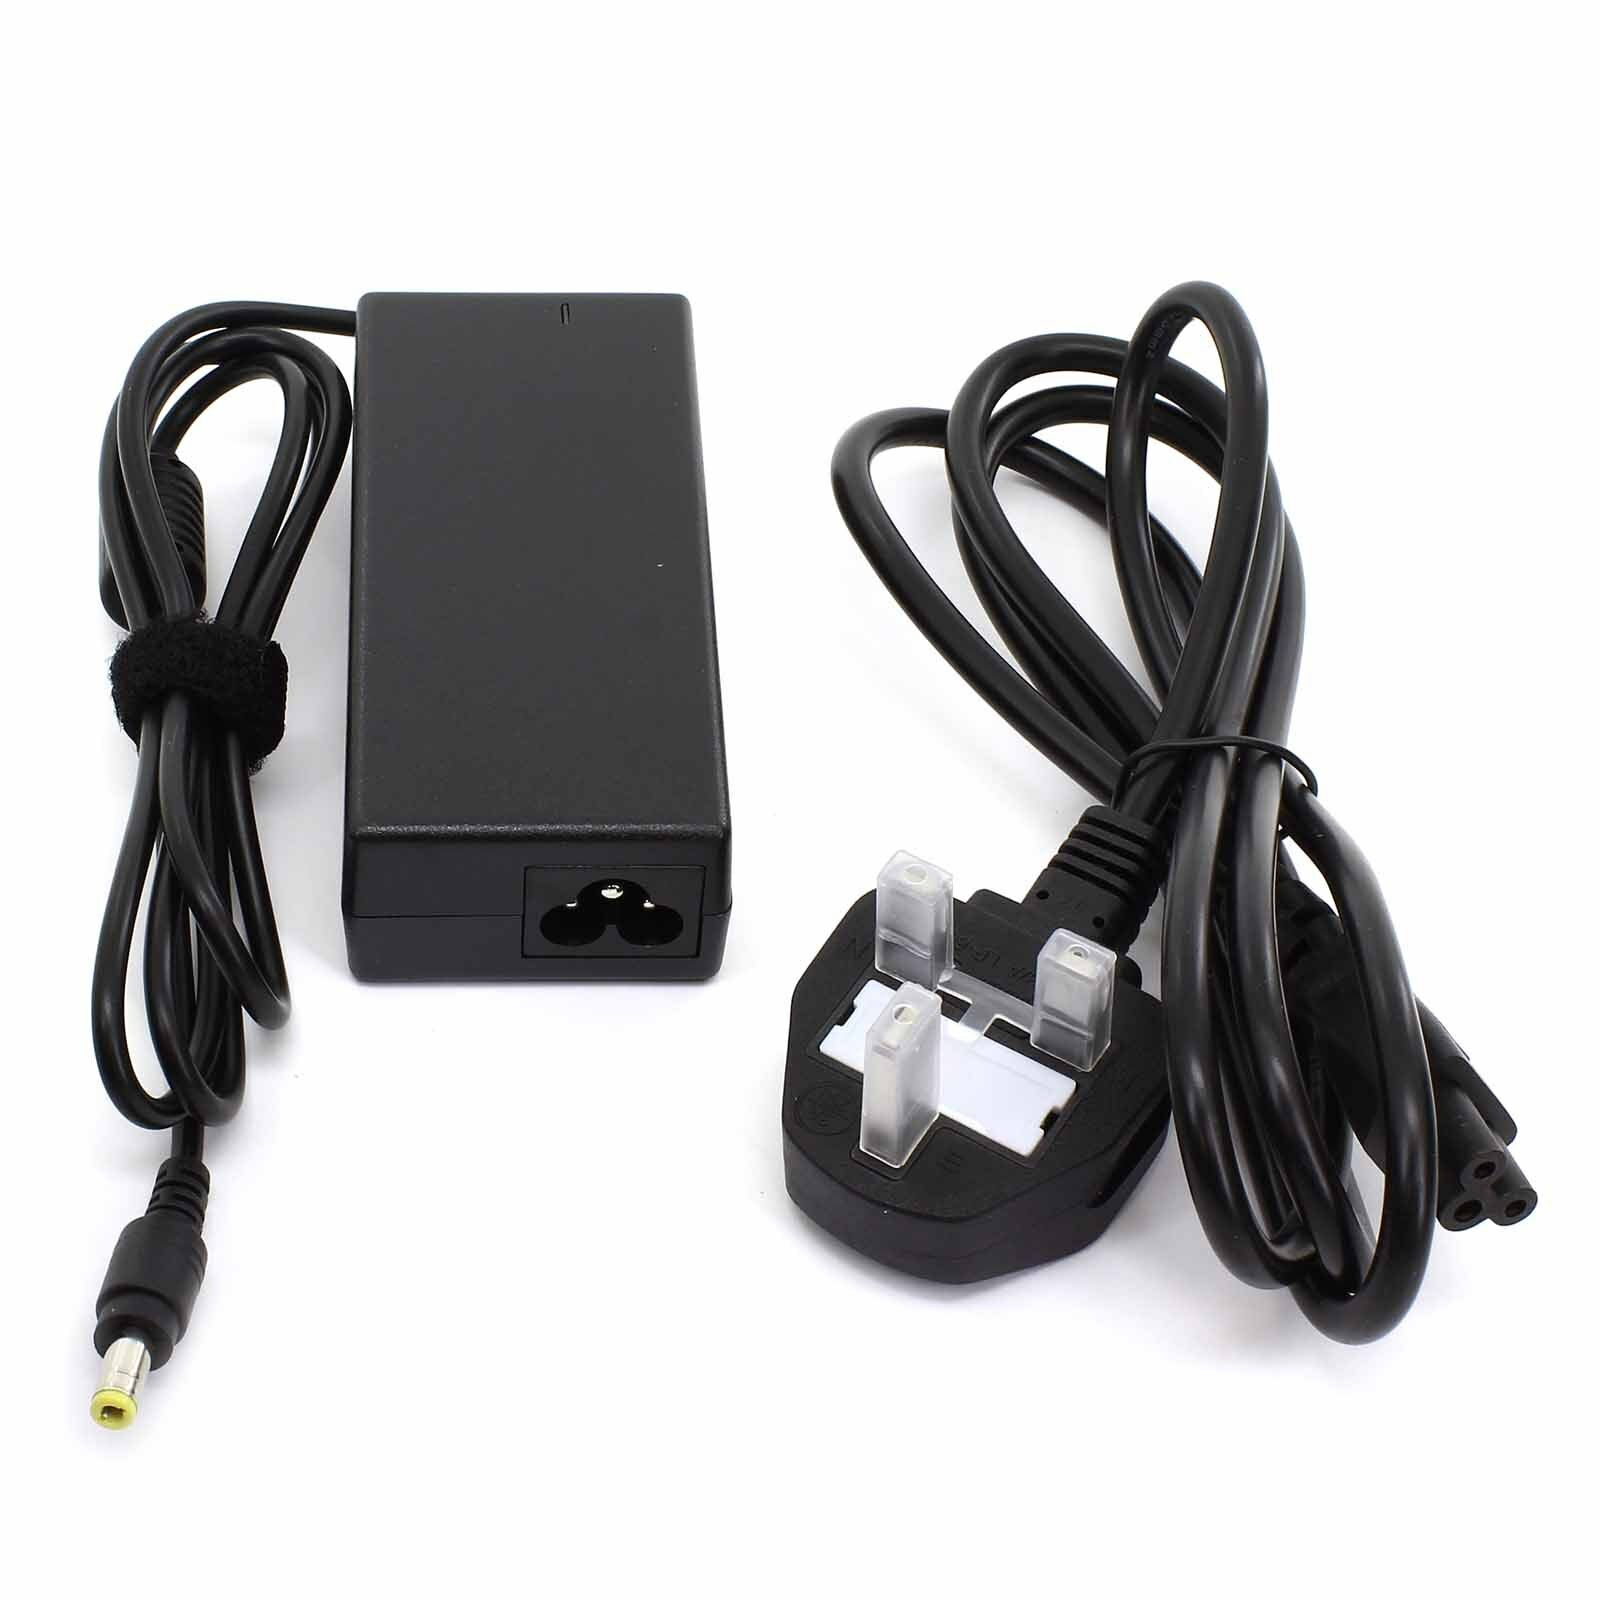 NEW PA-1250-98 w14-026n1a BA44-00322A Samsung Chromebook 3 XE500C13 2 XE500C12 PA-1250-98 Charger AC Adapter 40W Compa